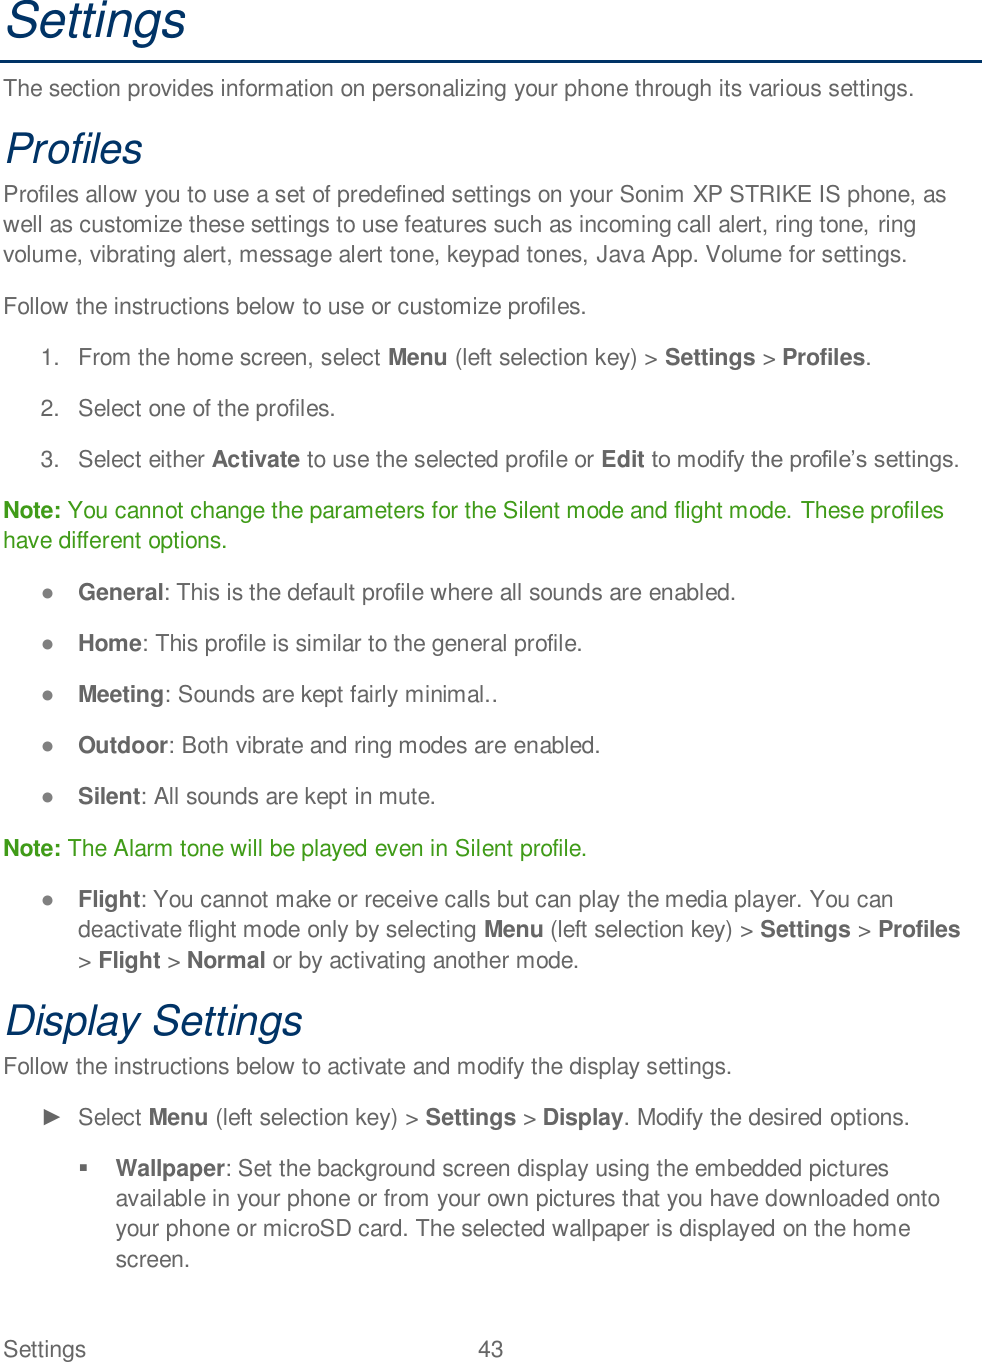 Settings  43   Settings The section provides information on personalizing your phone through its various settings. Profiles Profiles allow you to use a set of predefined settings on your Sonim XP STRIKE IS phone, as well as customize these settings to use features such as incoming call alert, ring tone, ring volume, vibrating alert, message alert tone, keypad tones, Java App. Volume for settings. Follow the instructions below to use or customize profiles. 1.  From the home screen, select Menu (left selection key) &gt; Settings &gt; Profiles. 2.  Select one of the profiles. 3.  Select either Activate to use the selected profile or Edit  Note: You cannot change the parameters for the Silent mode and flight mode. These profiles have different options.  General: This is the default profile where all sounds are enabled.  Home: This profile is similar to the general profile.  Meeting: Sounds are kept fairly minimal..   Outdoor: Both vibrate and ring modes are enabled.  Silent: All sounds are kept in mute. Note: The Alarm tone will be played even in Silent profile.  Flight: You cannot make or receive calls but can play the media player. You can deactivate flight mode only by selecting Menu (left selection key) &gt; Settings &gt; Profiles &gt; Flight &gt; Normal or by activating another mode. Display Settings Follow the instructions below to activate and modify the display settings.   Select Menu (left selection key) &gt; Settings &gt; Display. Modify the desired options.   Wallpaper: Set the background screen display using the embedded pictures available in your phone or from your own pictures that you have downloaded onto your phone or microSD card. The selected wallpaper is displayed on the home screen.  